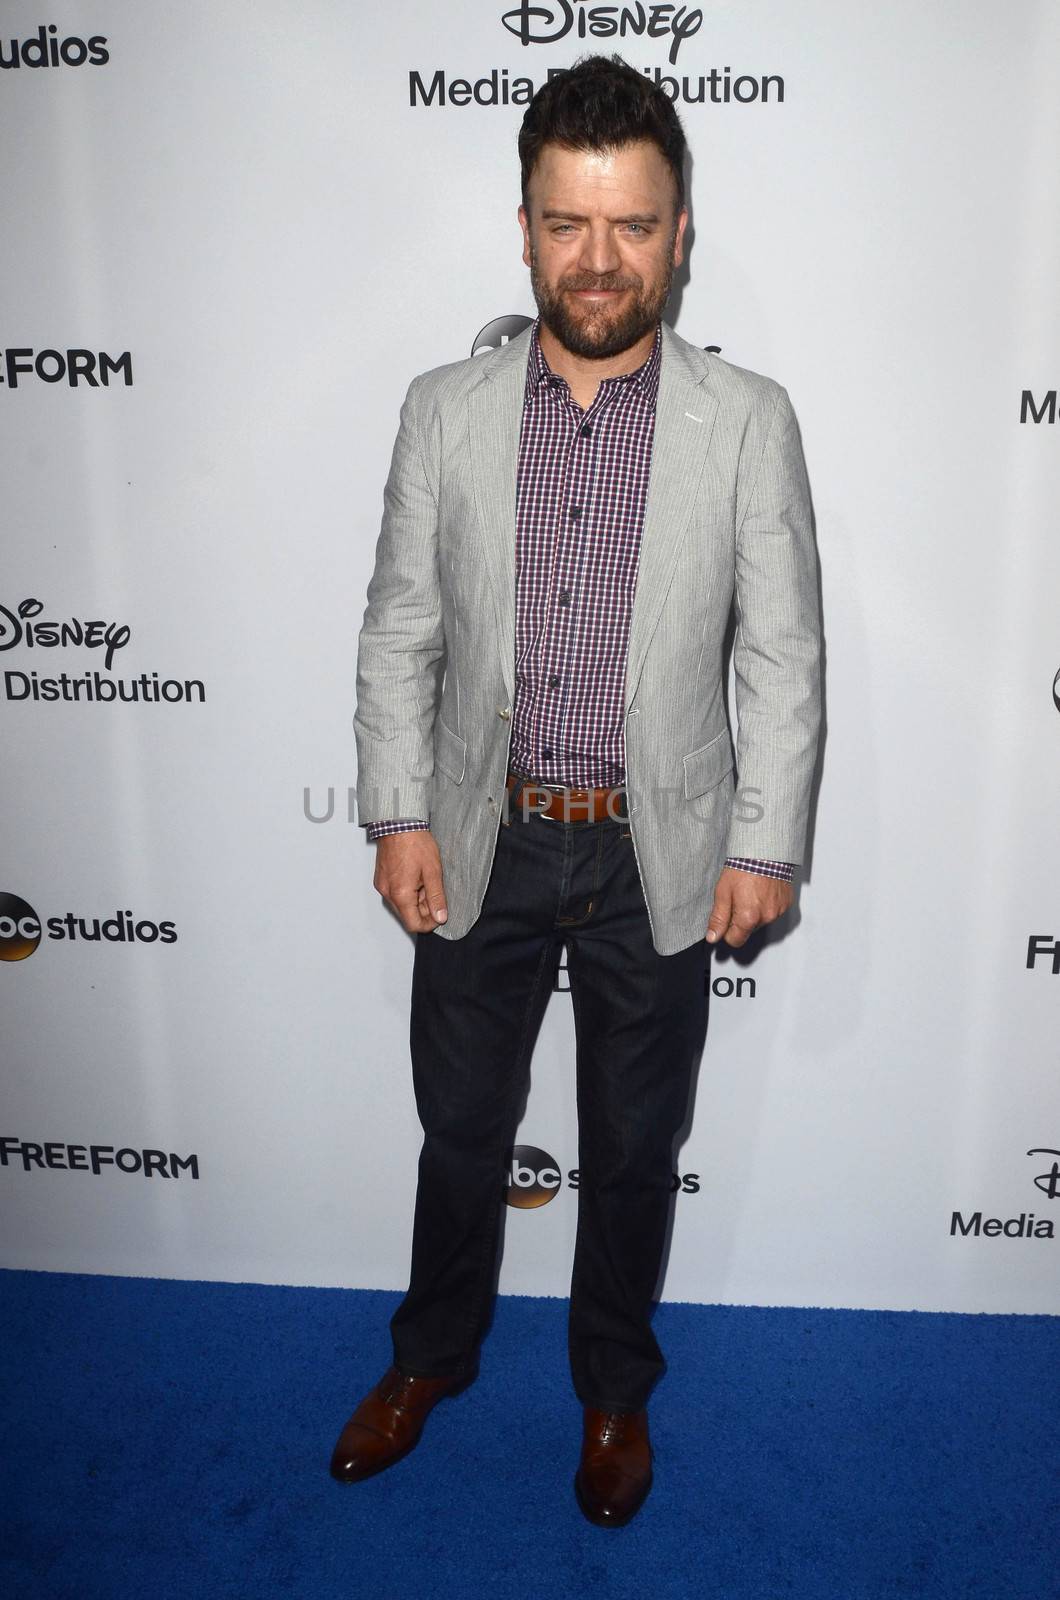 Kevin Weisman
at the 2017 ABC International Upfronts, Disney Studios, Burbank, CA 05-21-17/ImageCollect by ImageCollect